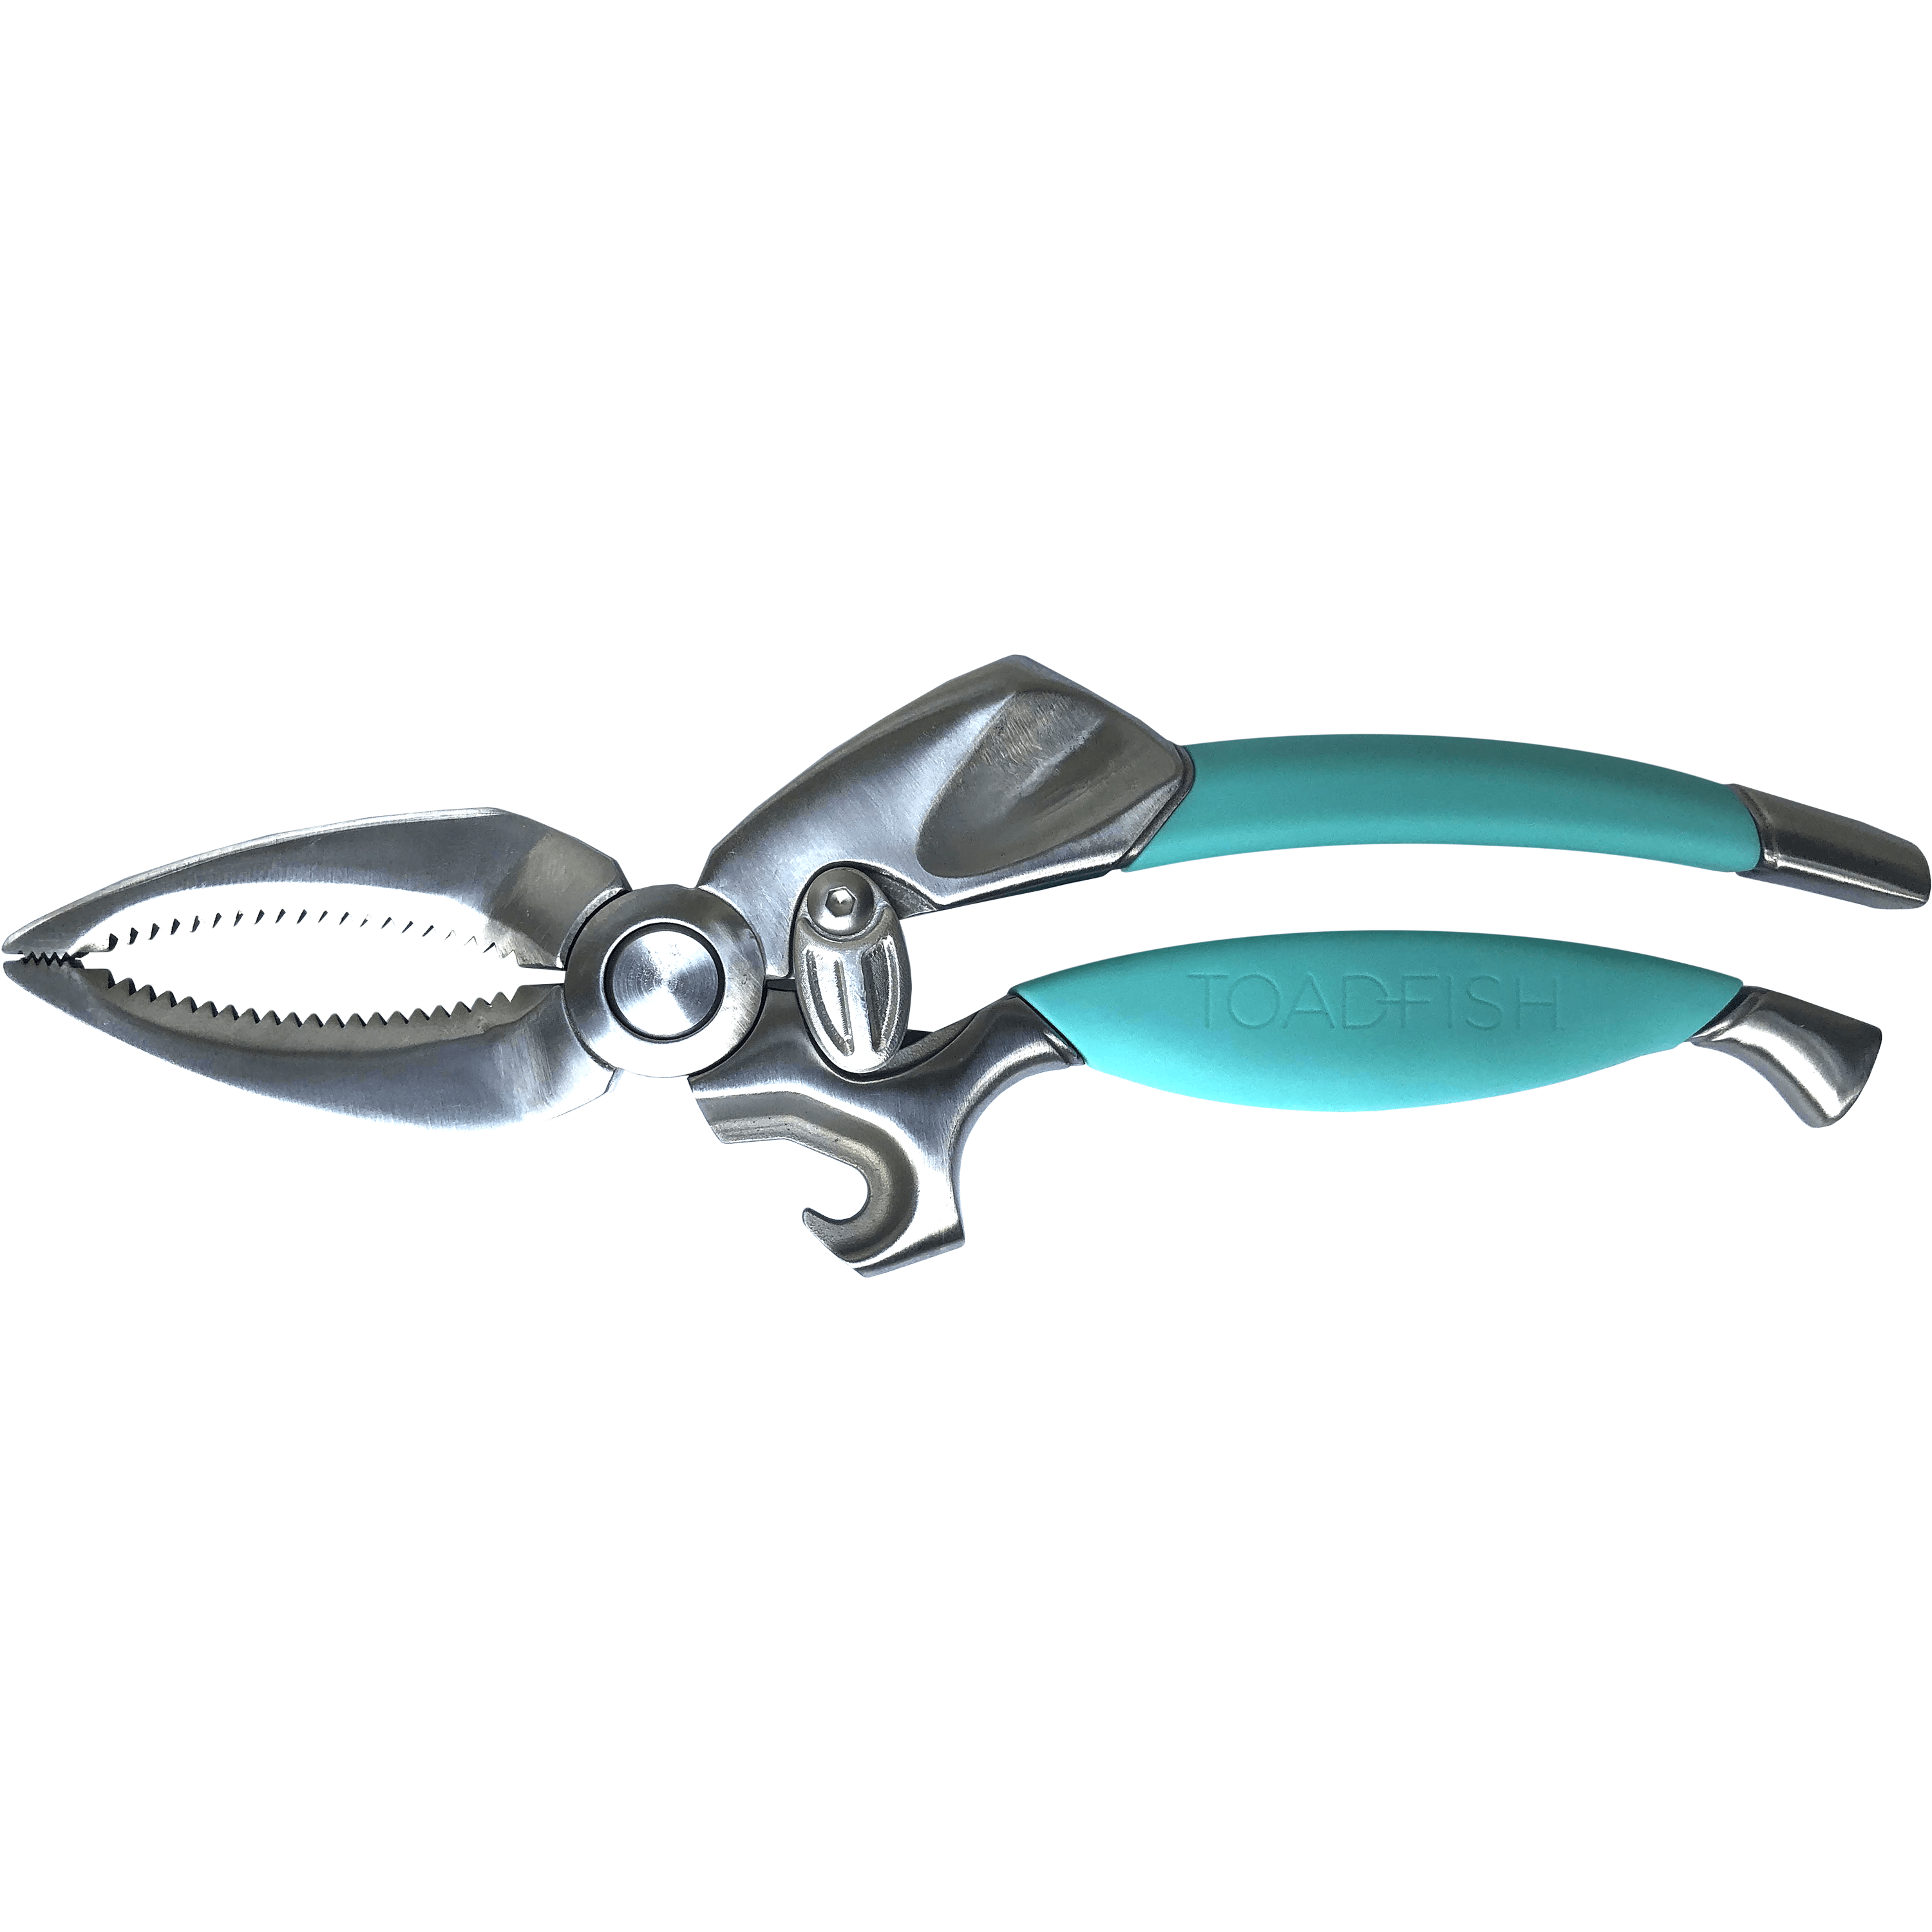 1006 of Toadfish Outfitters Crab Claw Cutter